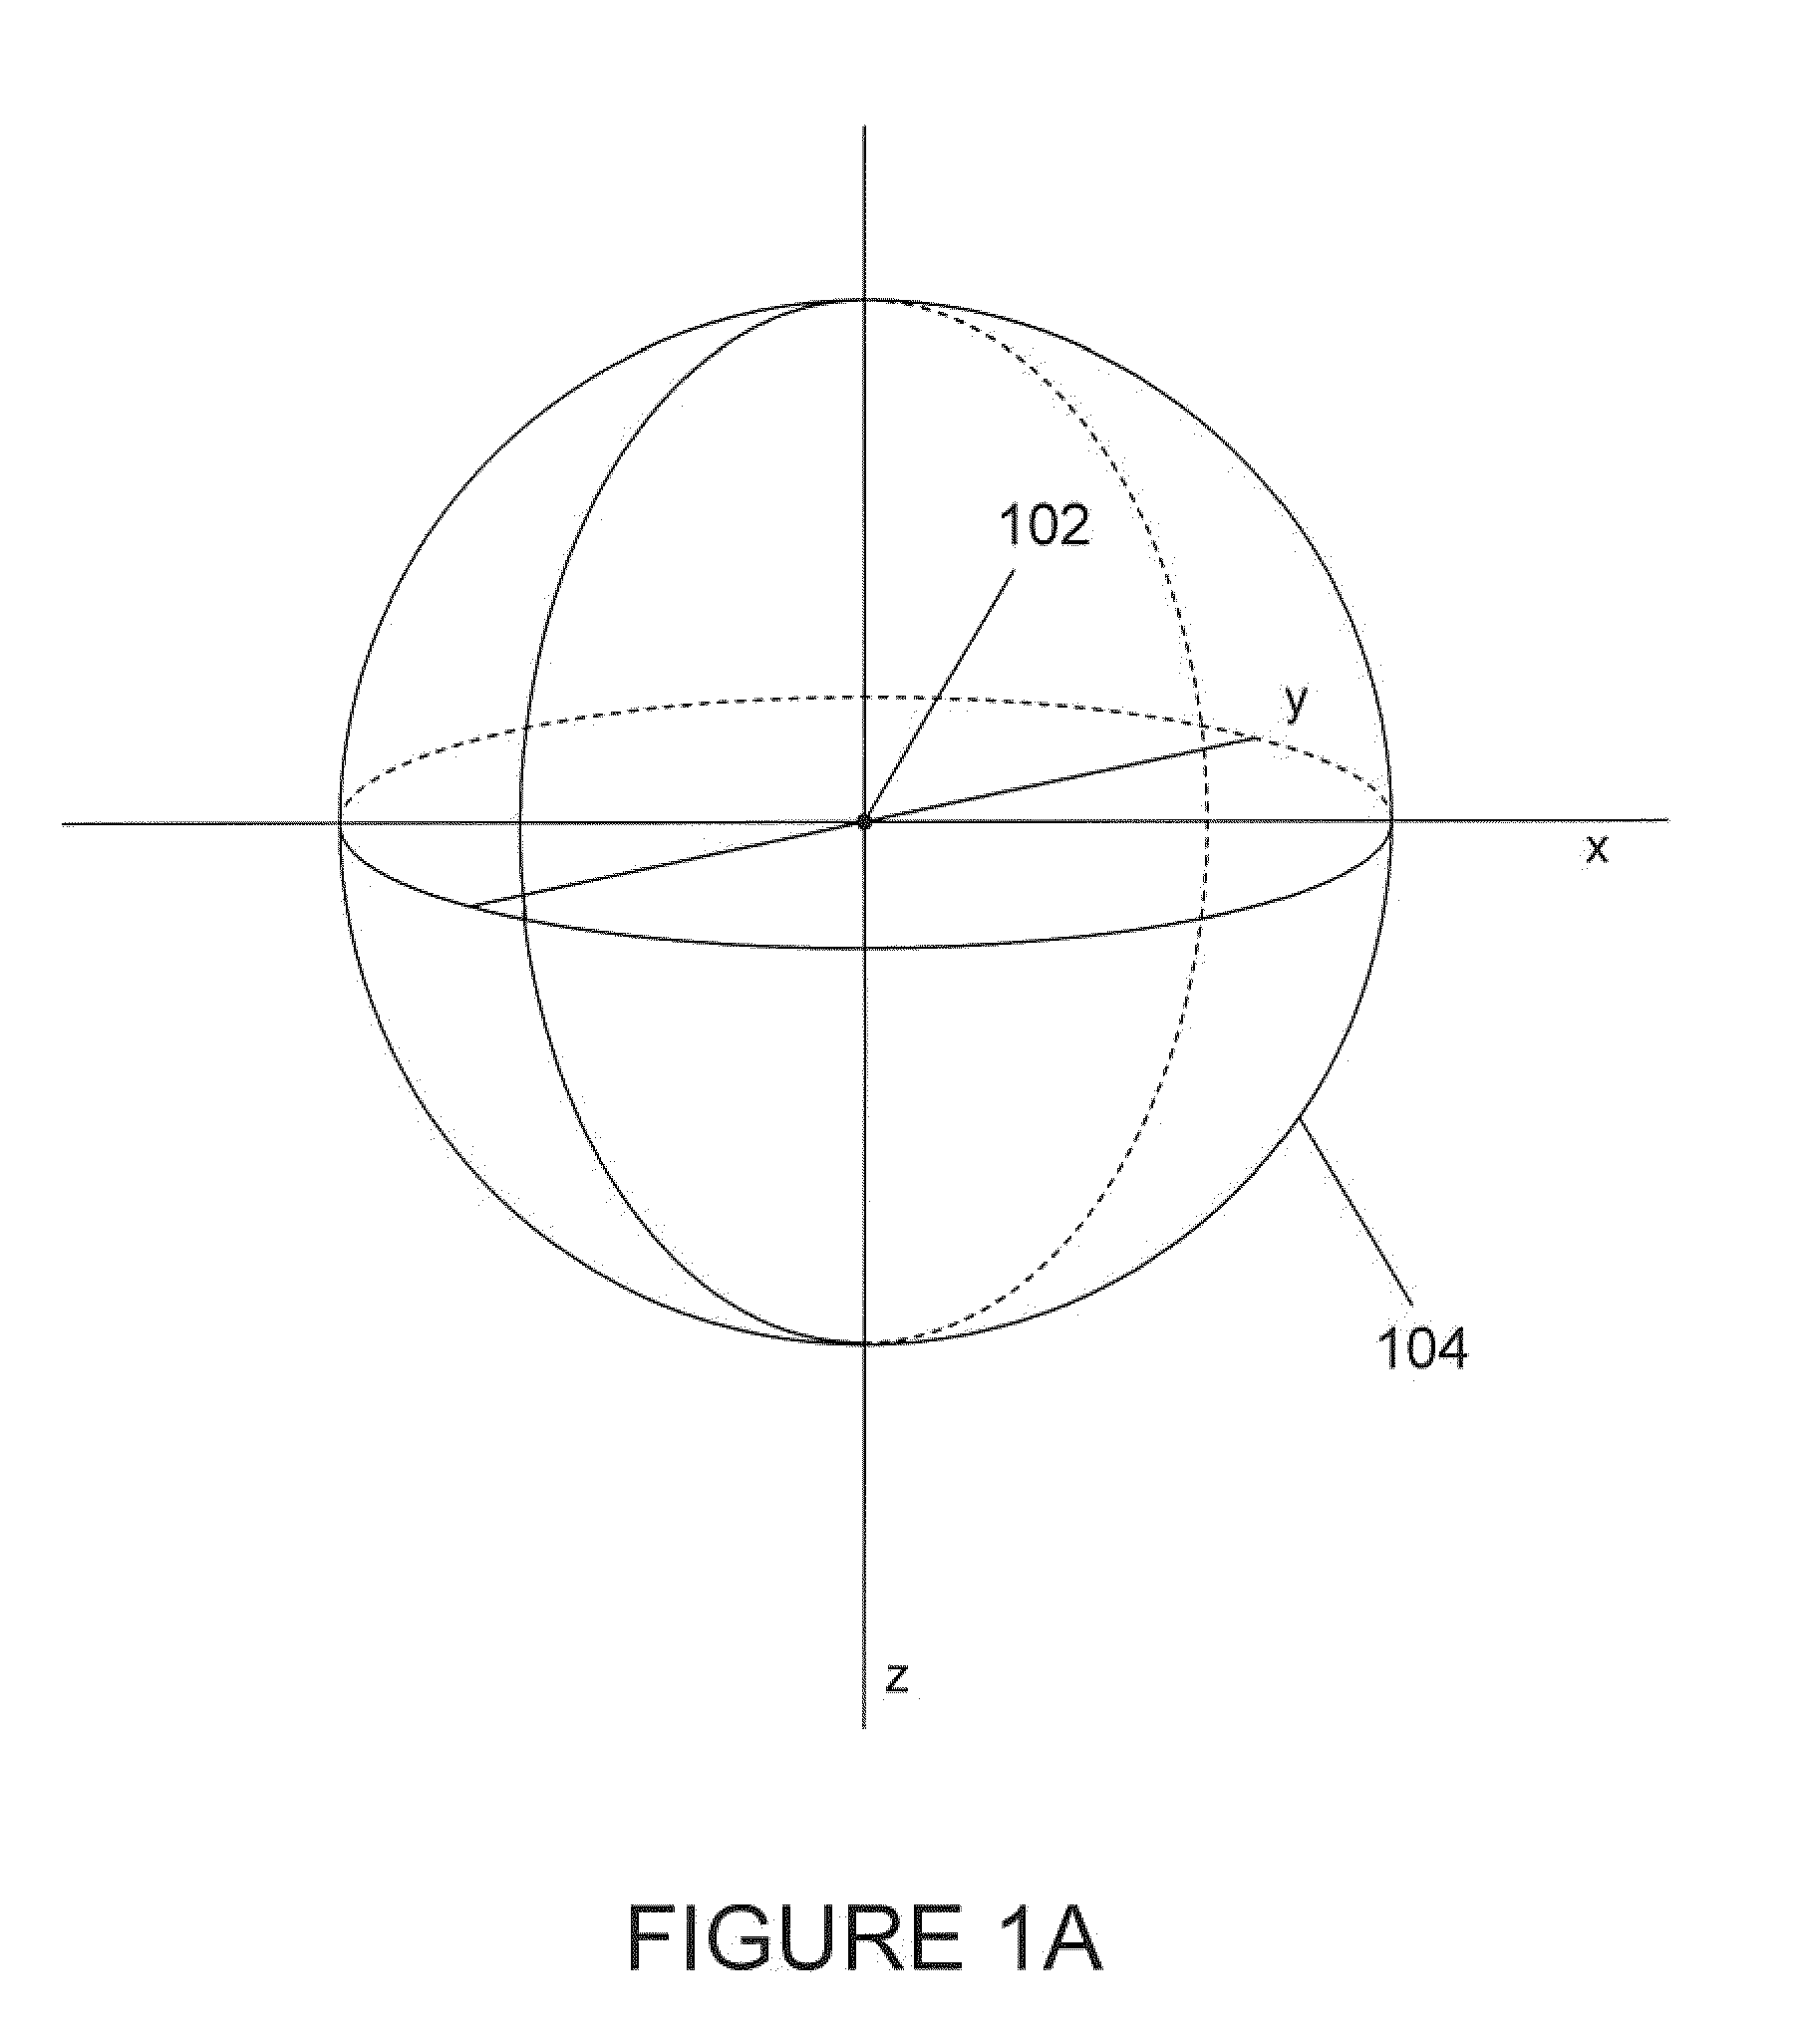 Method and system for characterizing tumors